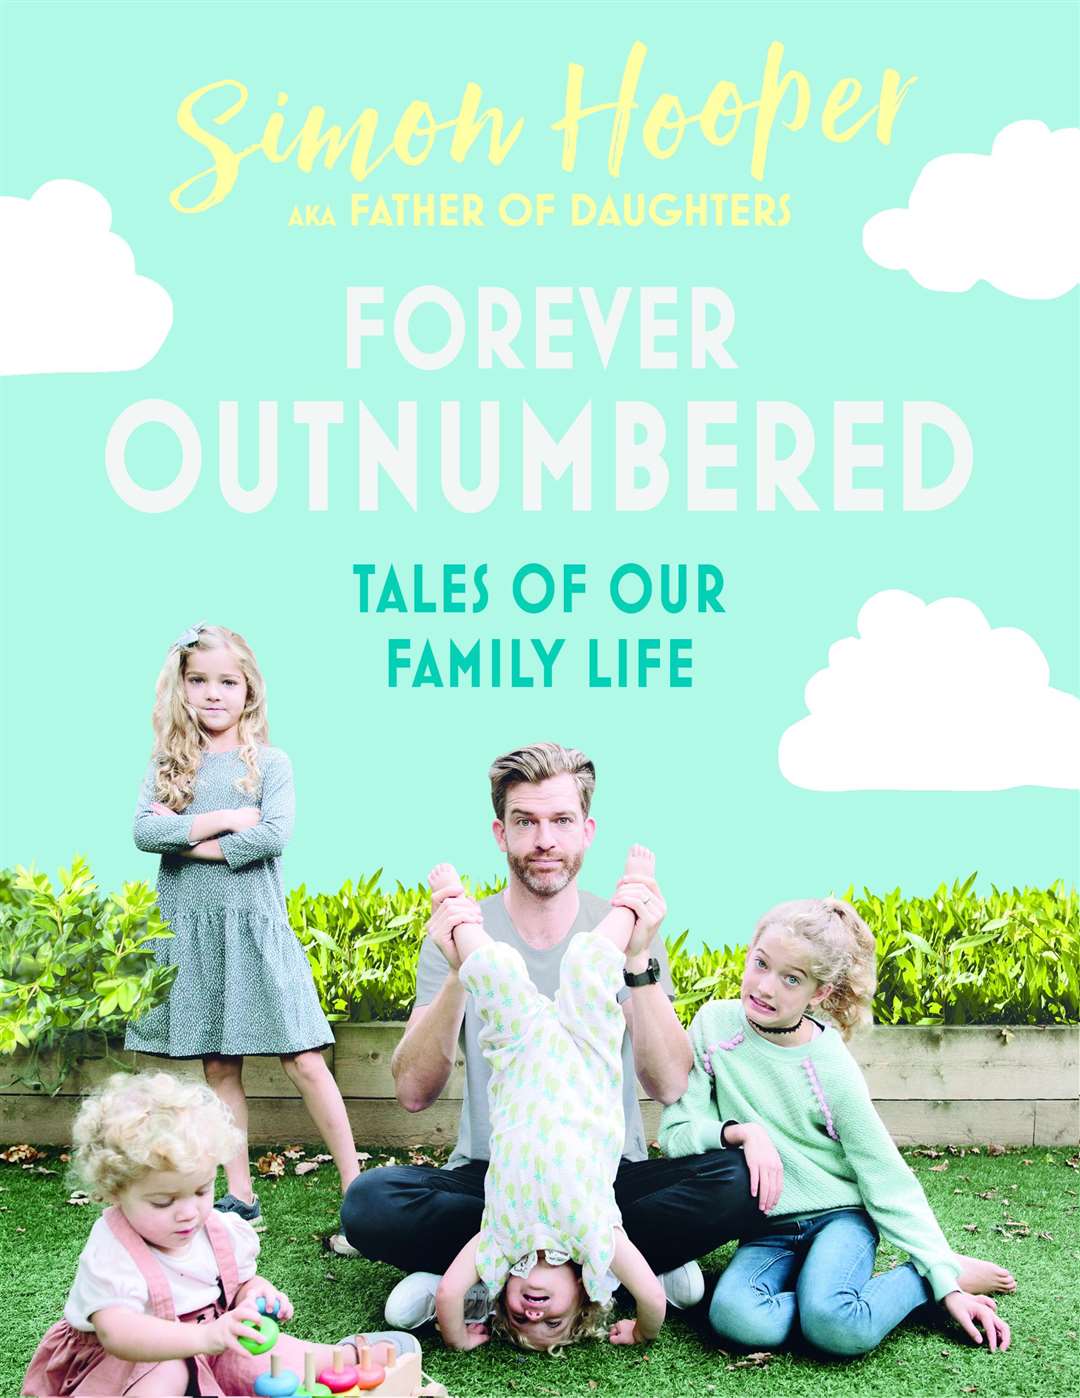 Forever Outnumbered is released on May 3